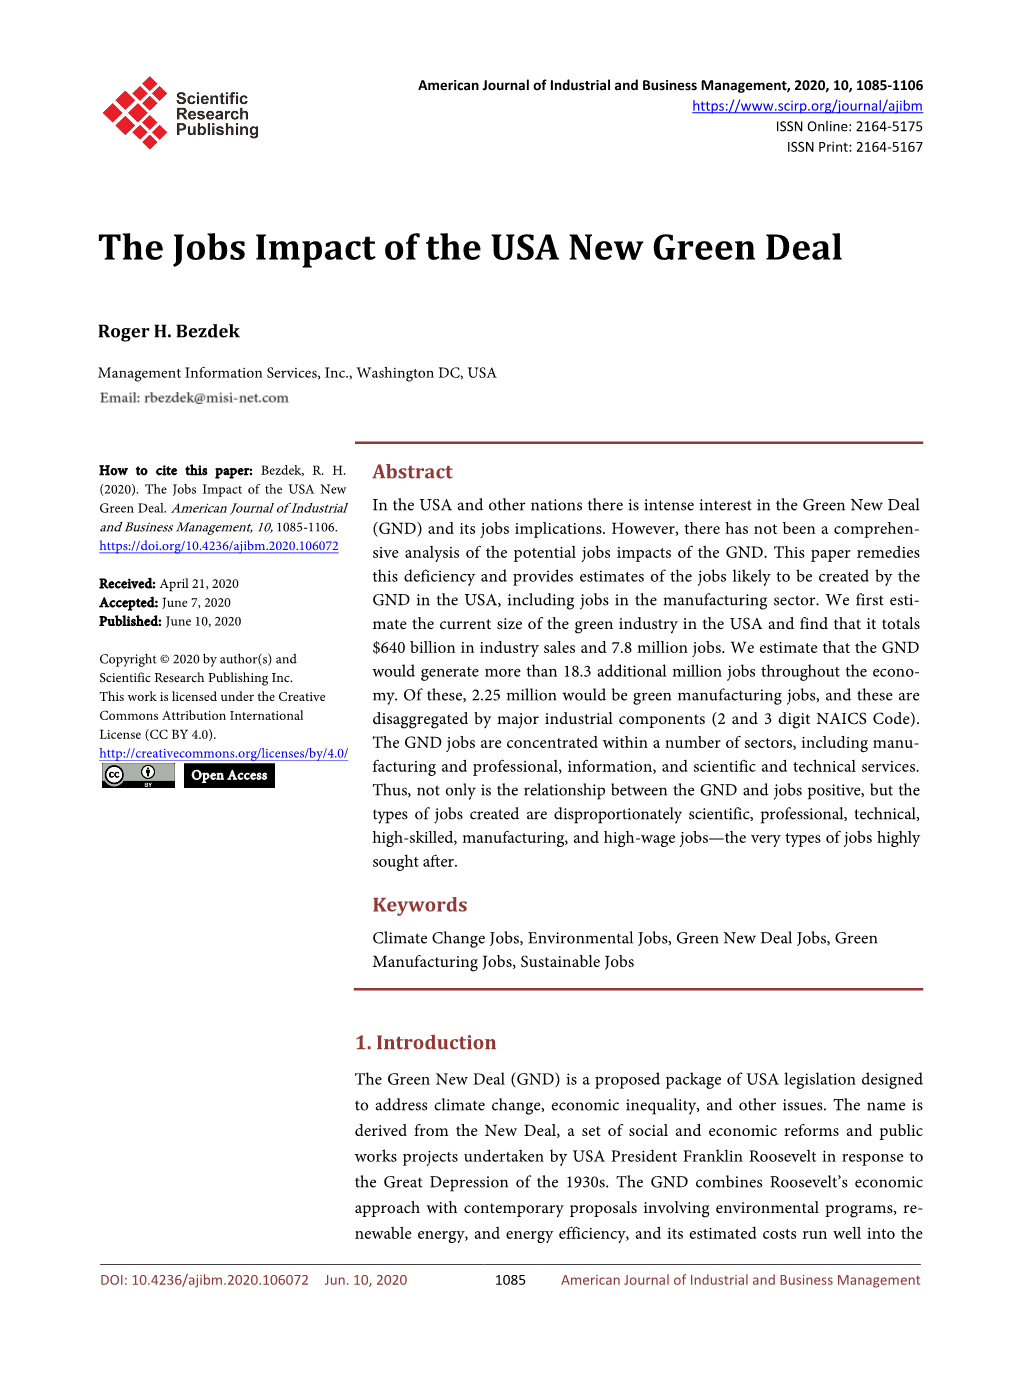 The Jobs Impact of the USA New Green Deal